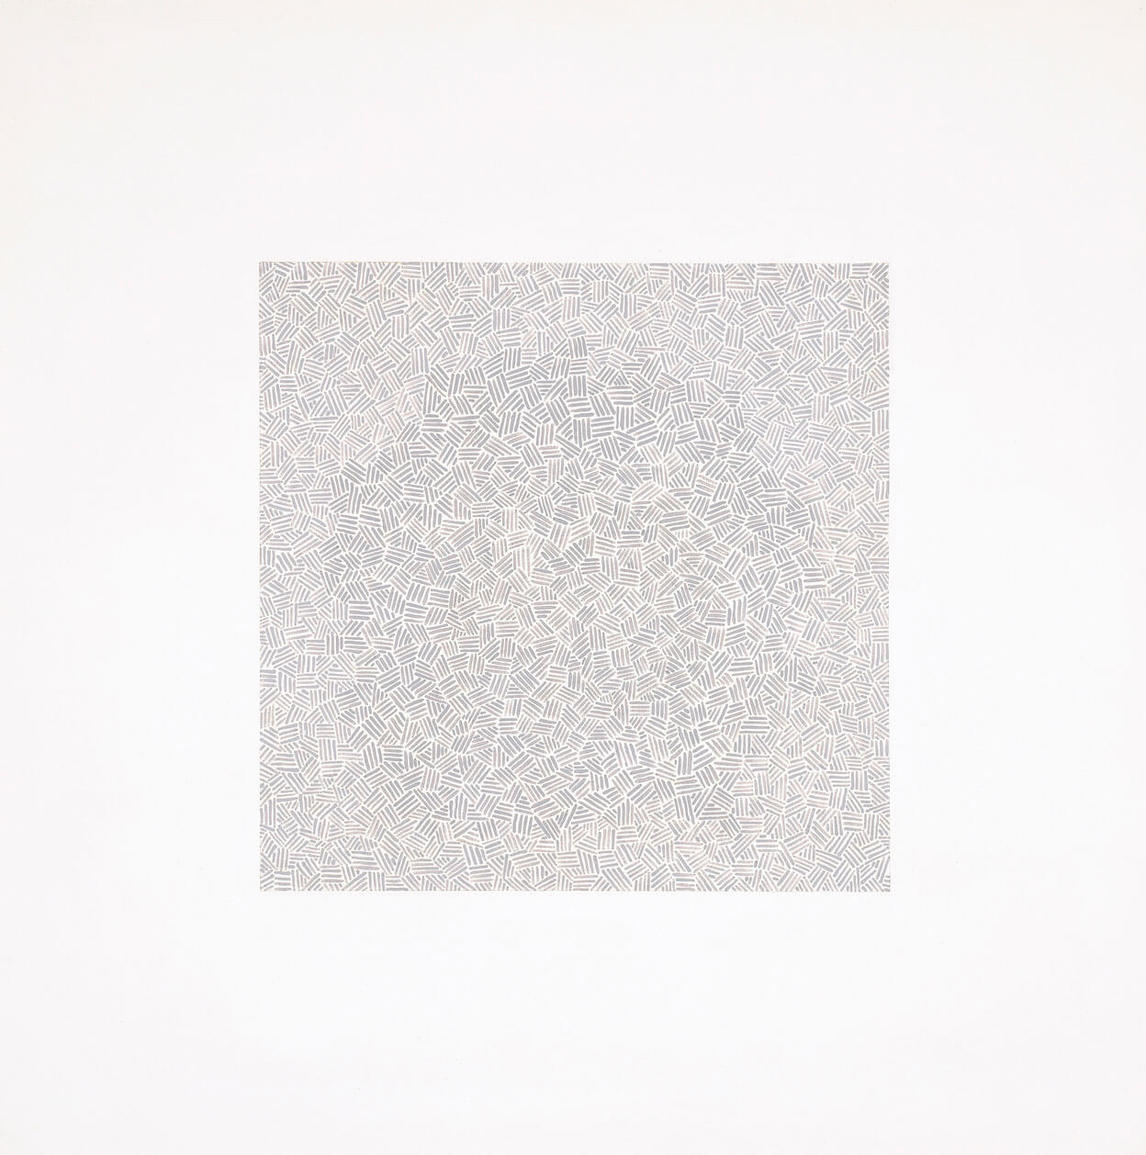 Square No. 3, 1978​​​​​​​, by Robert Houle